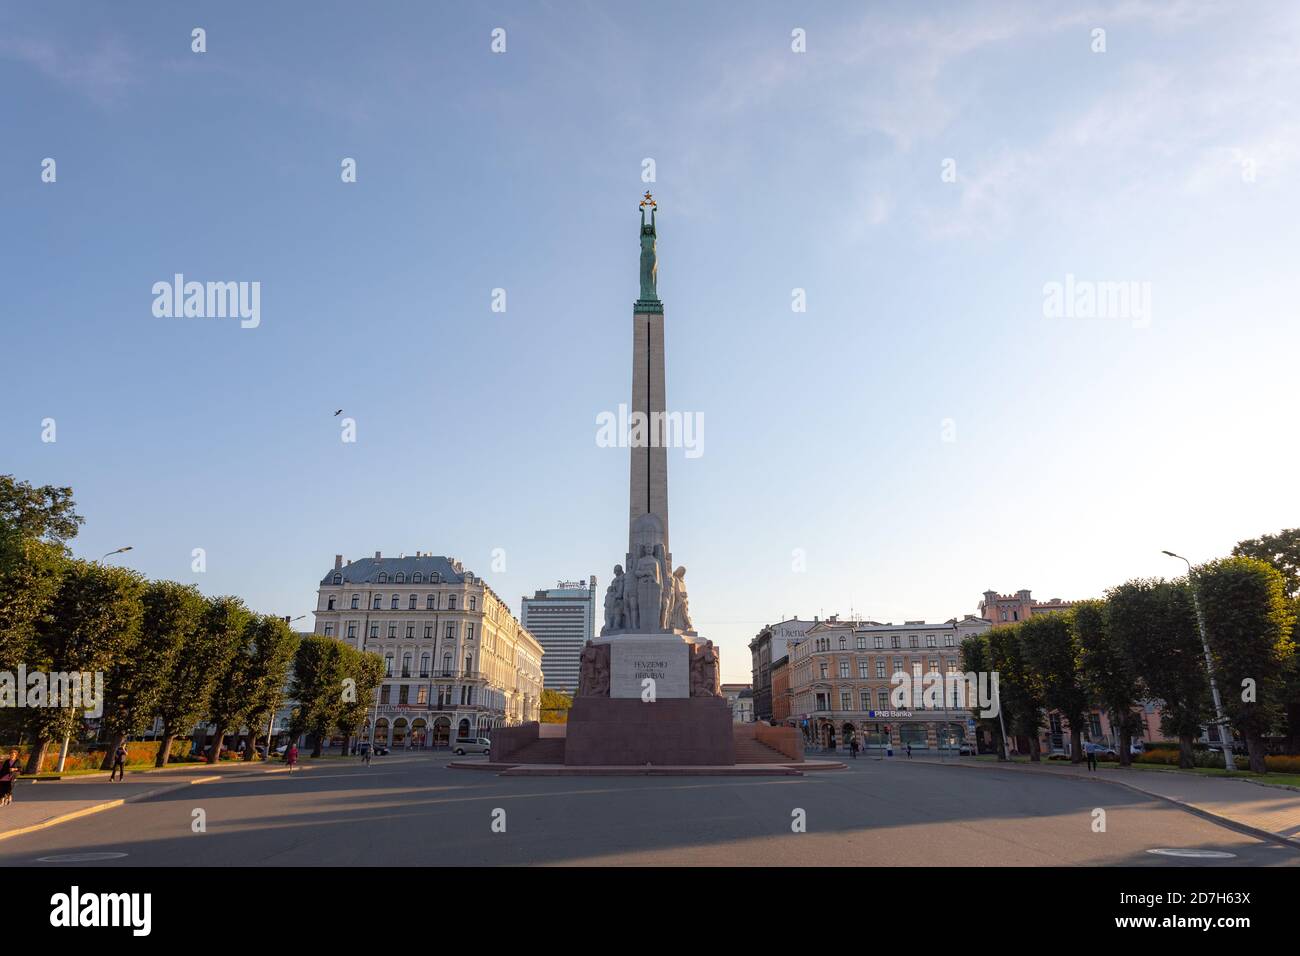 The Freedom Monument statue dedicated to Latvians who lost their lives fighting for independence between 1918 - 1920 Stock Photo